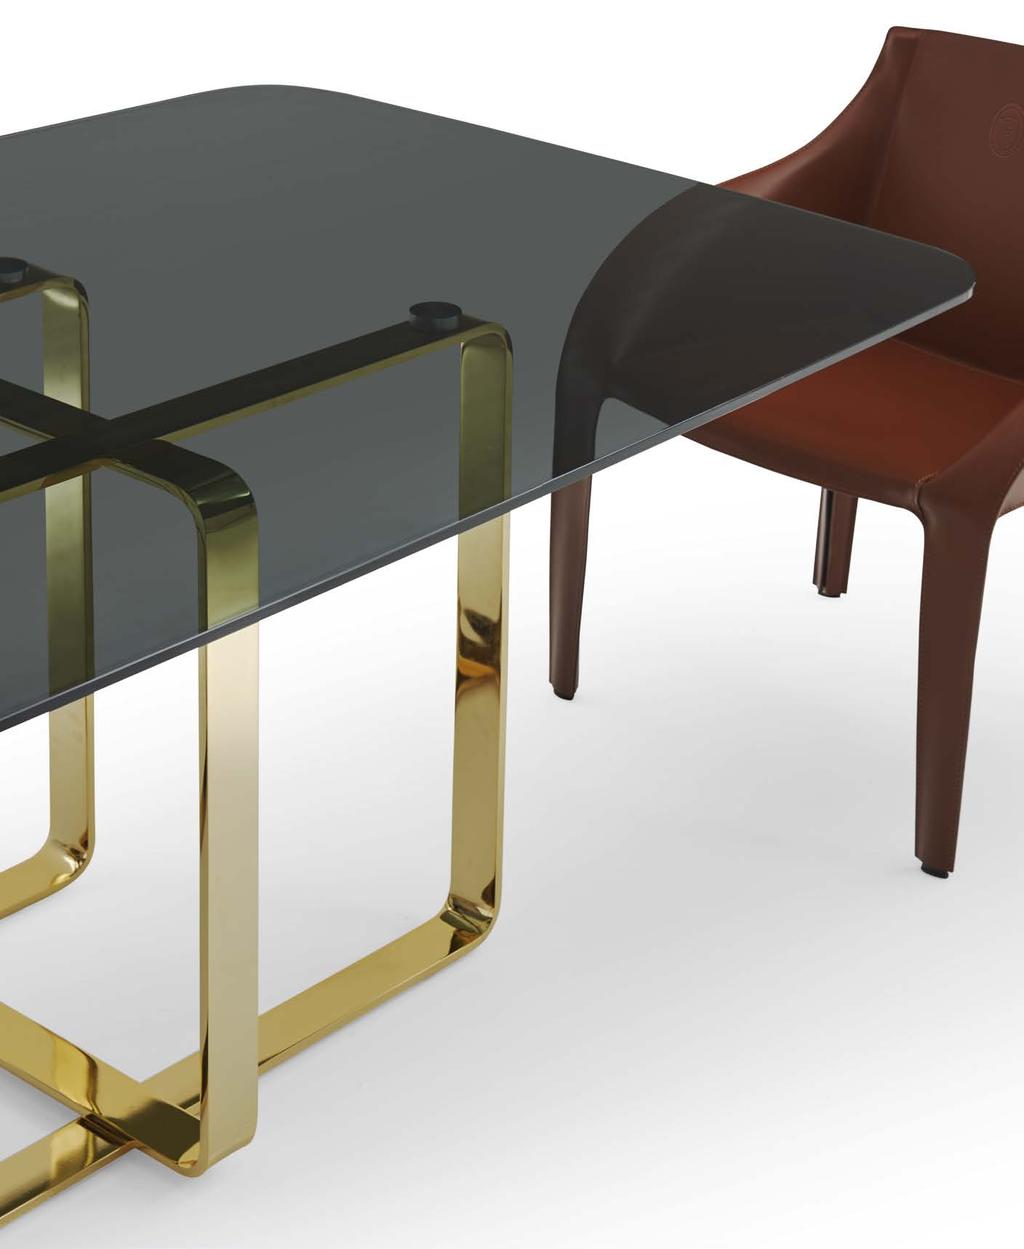 CLETO Table, TTV (17) Smoke grey tempered glass top and steel legs with polished brass finishing.